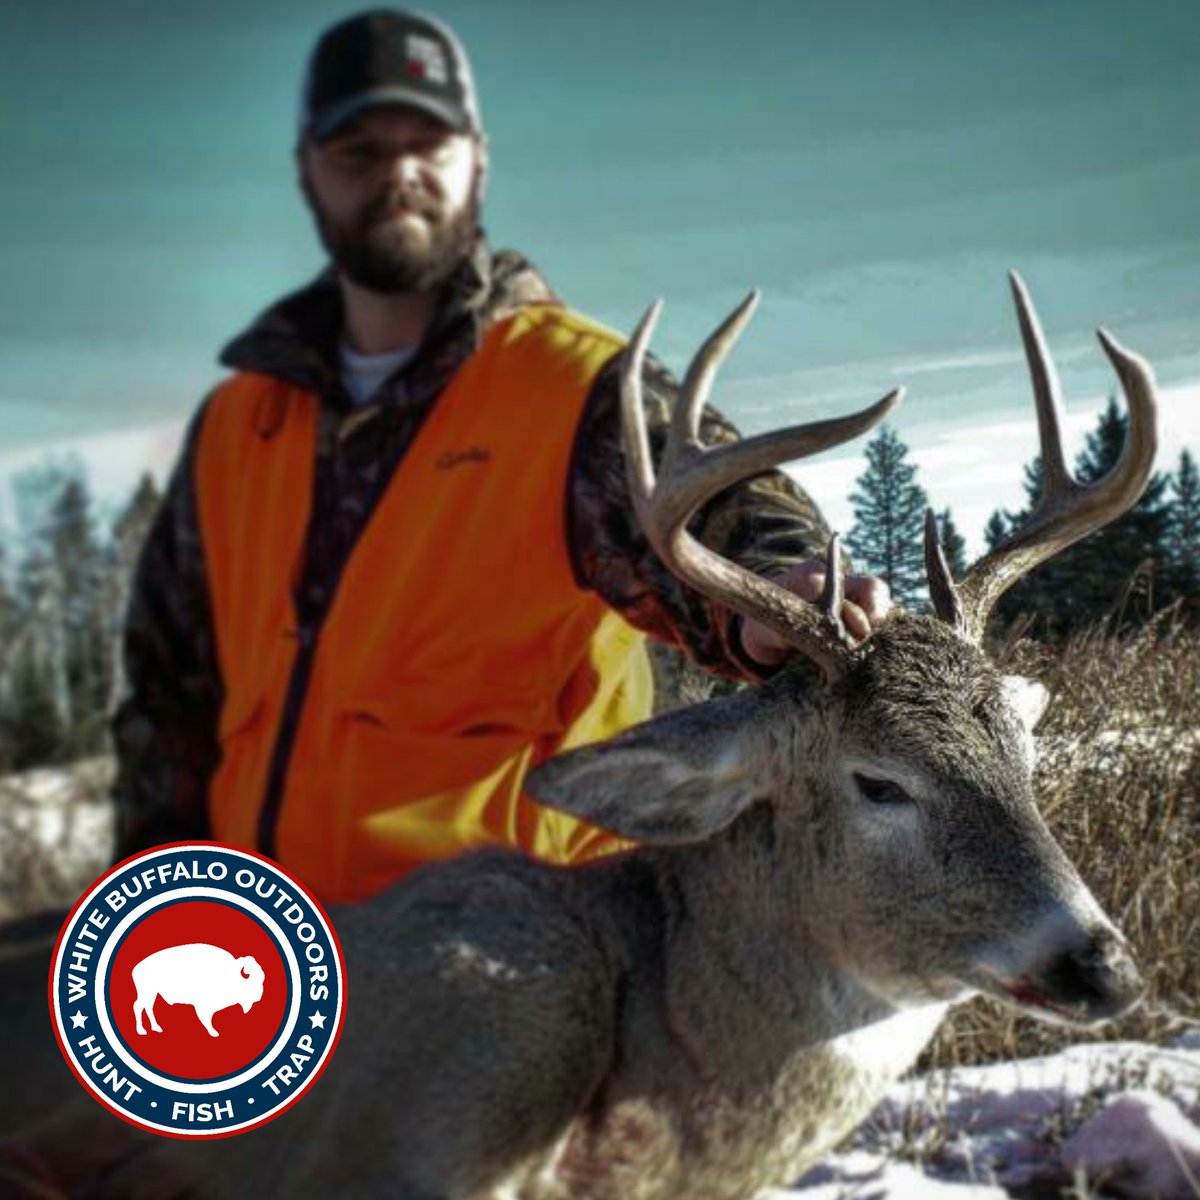 🔥🔥🔥 James from Manitoba with a great buck!  Thank you James for sharing 🤘🤘🤘 #whitebuffalooutdoors #canadahunting #manitoba #deerhunting